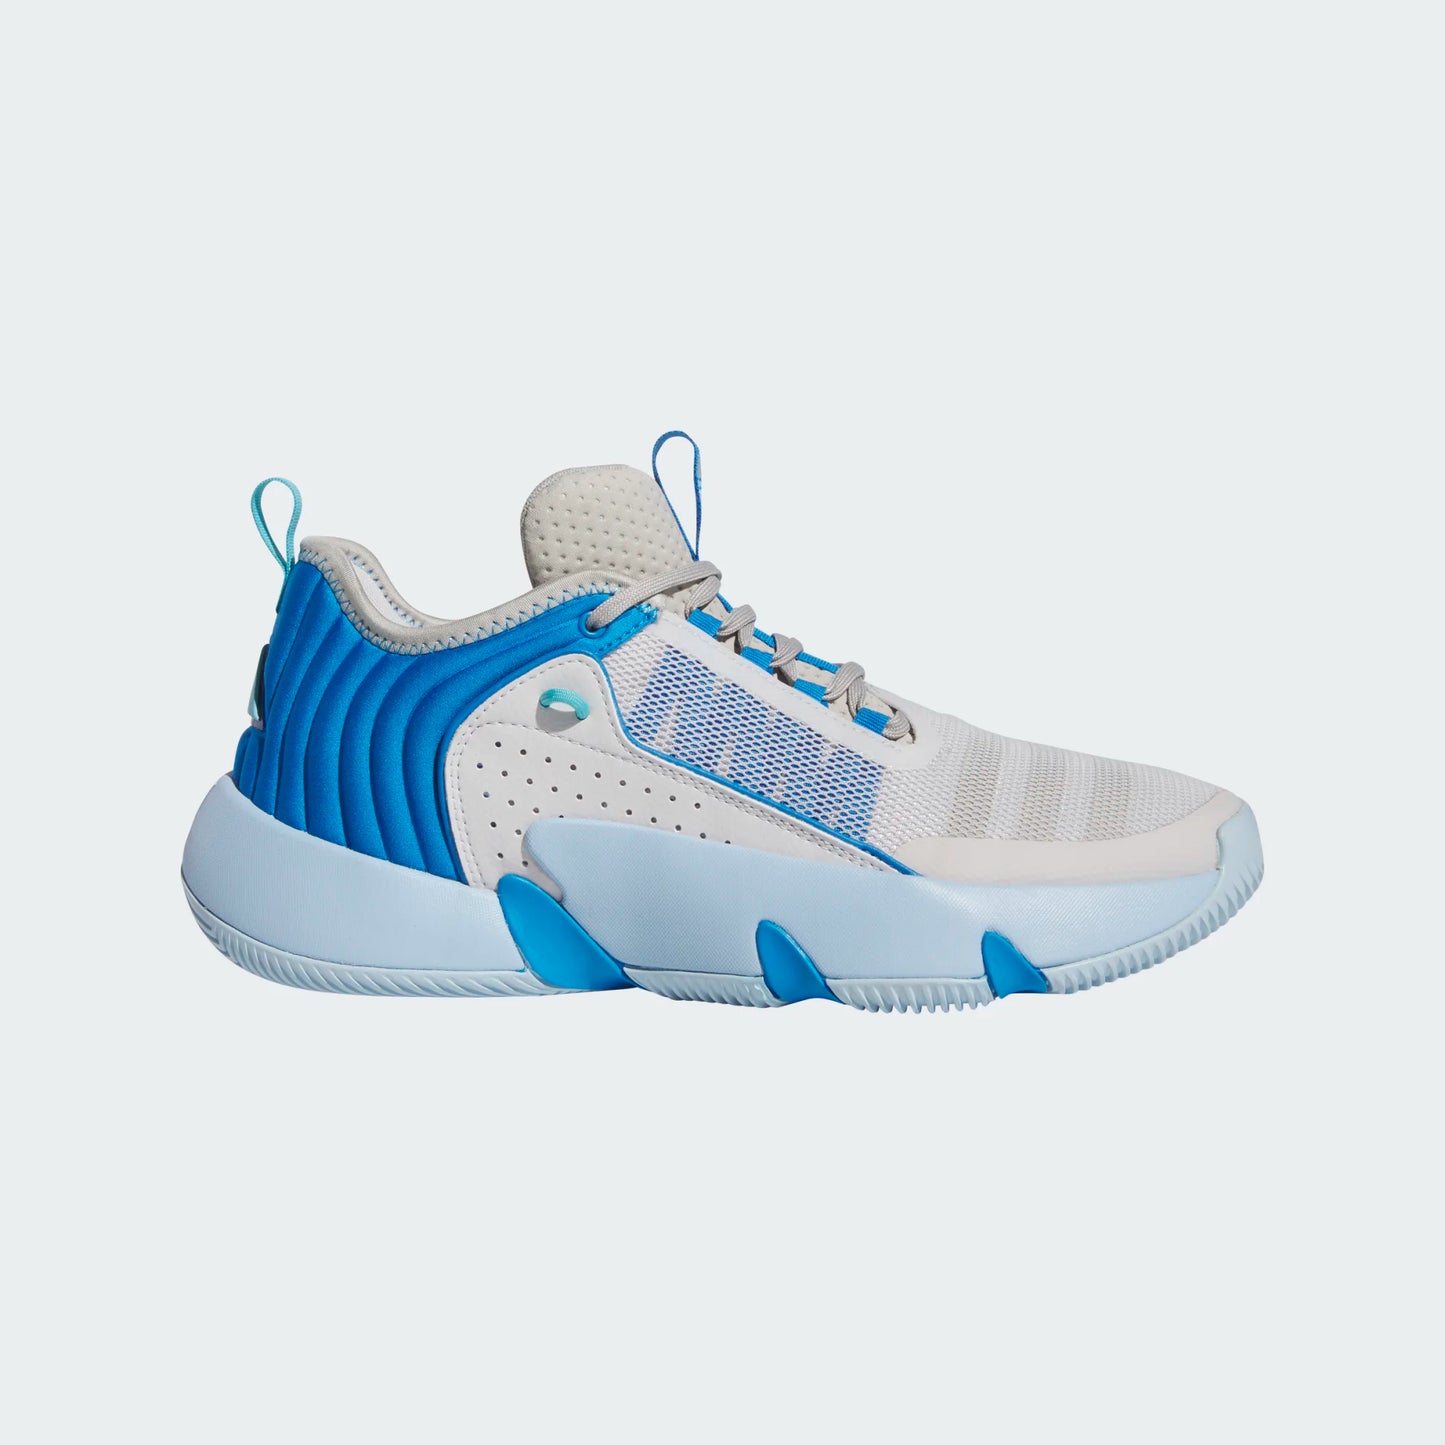 ADIDAS Trae Unlimited Basketball Shoes